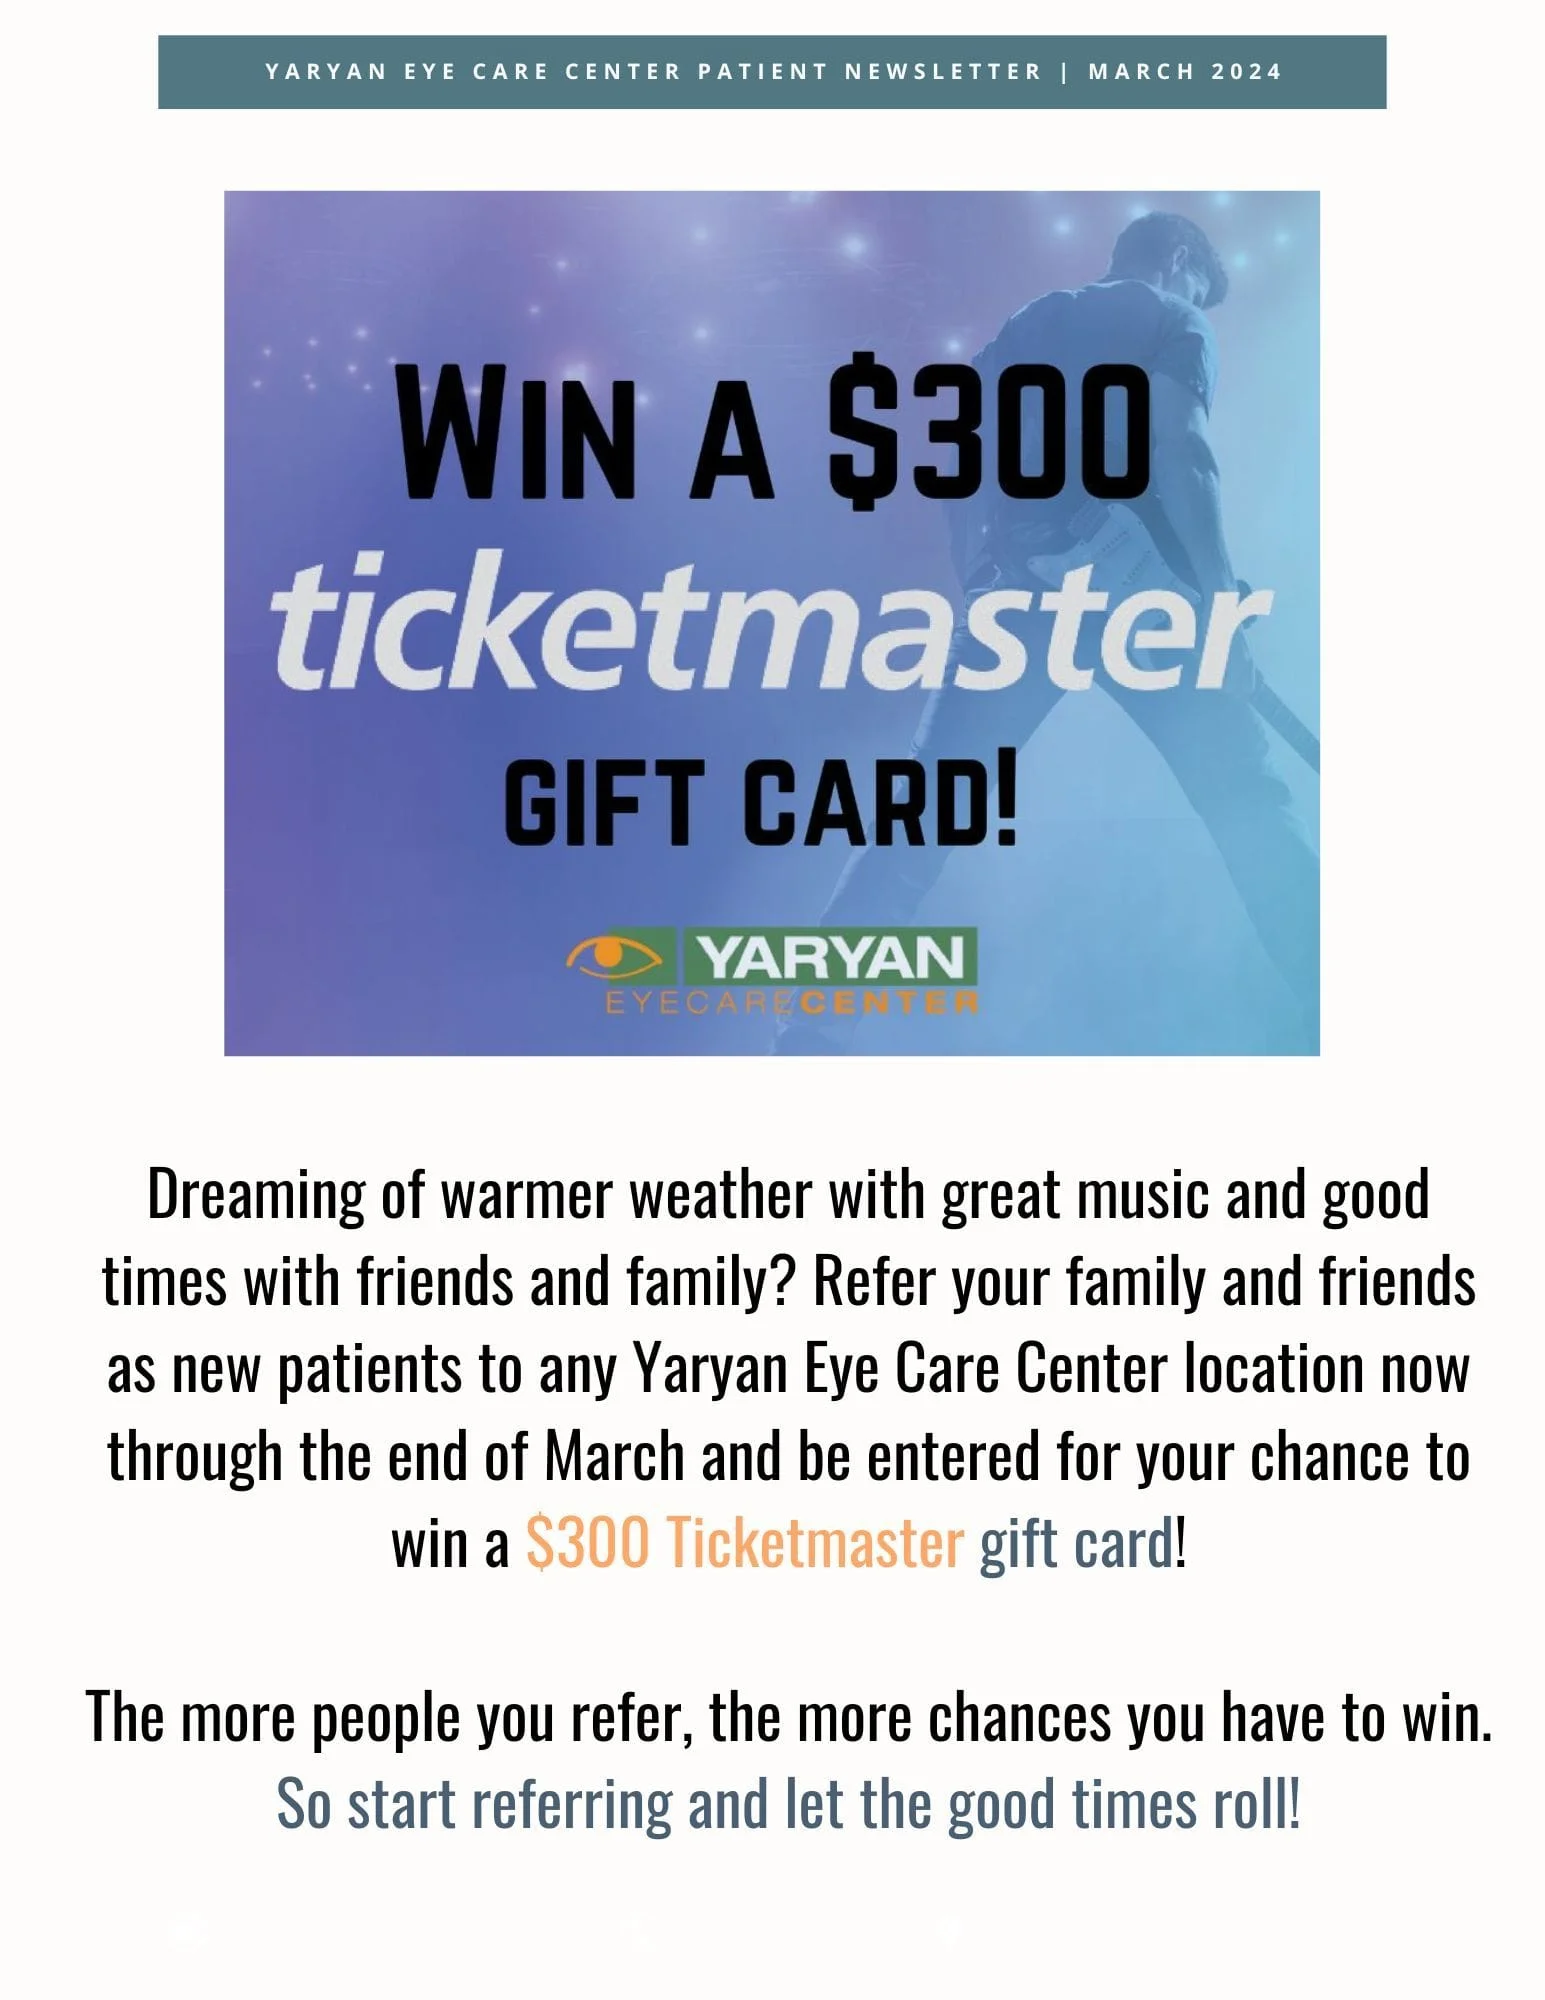 Win A $300 Ticketmaster Gift Card